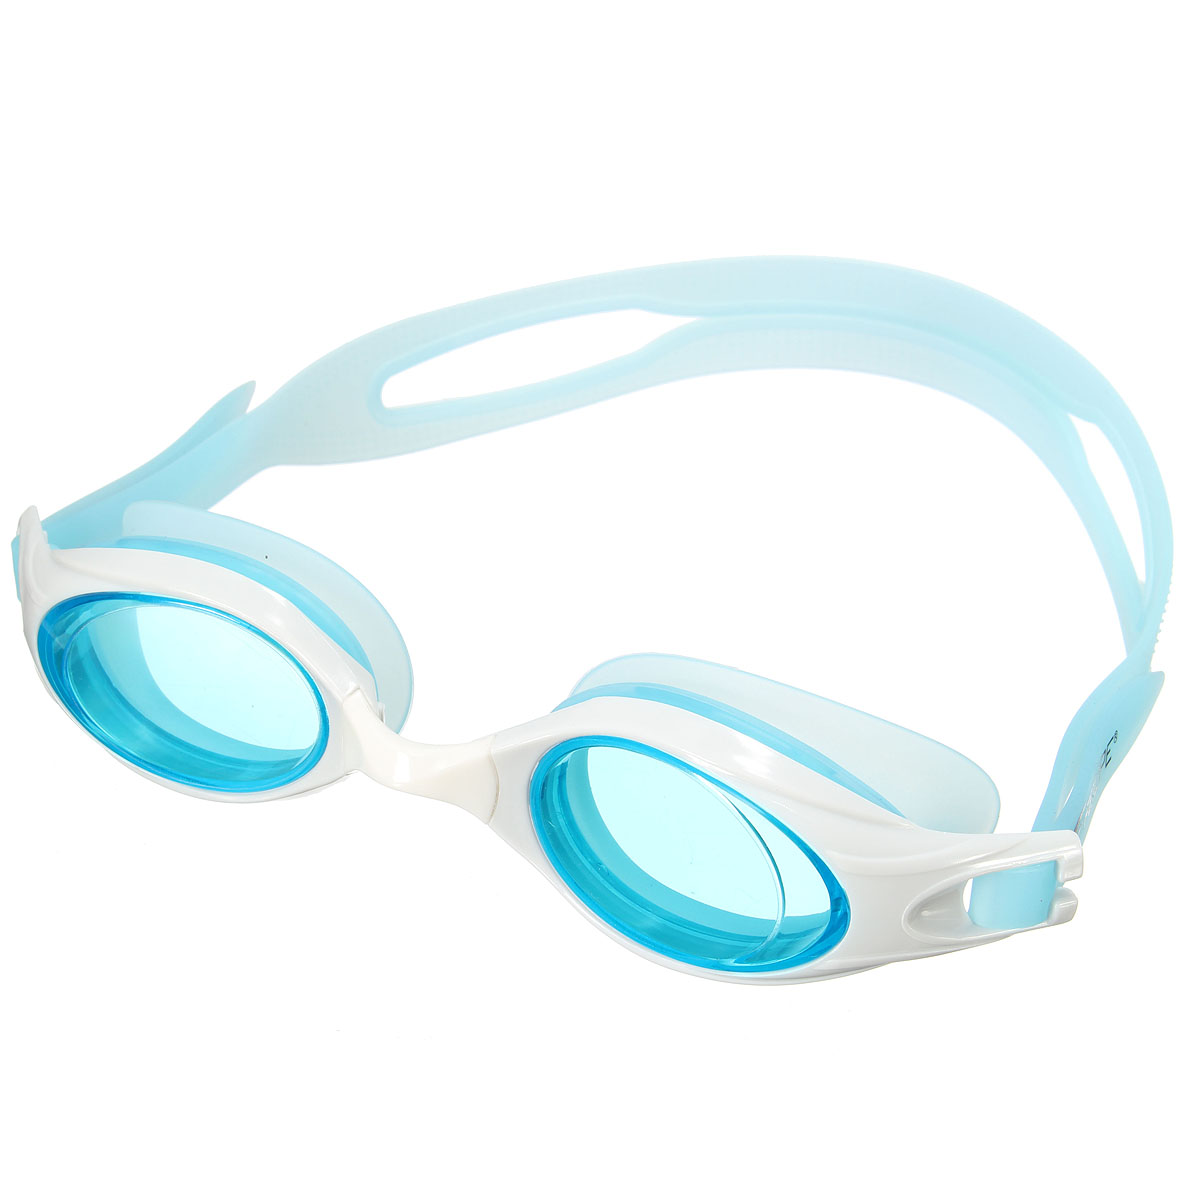 OUTEROO-Swimming-Glasses-PC-Silicone-Shockproof-Anti-fog-Anti-UV-Adjustable-Swimming-Goggles-for-Adu-1886066-3